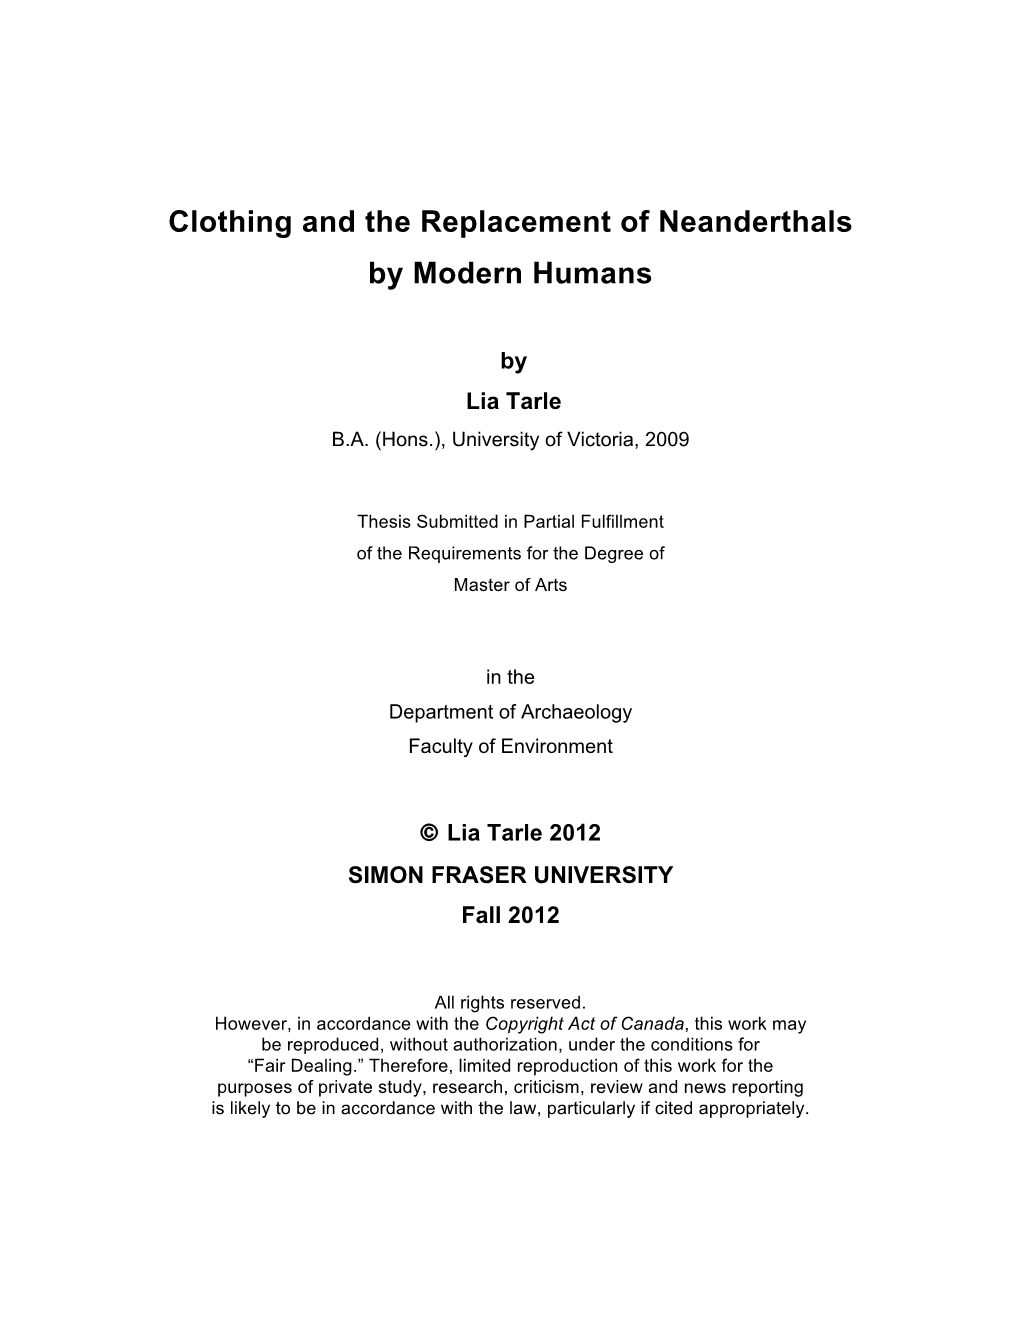 Clothing and the Replacement of Neanderthals by Modern Humans